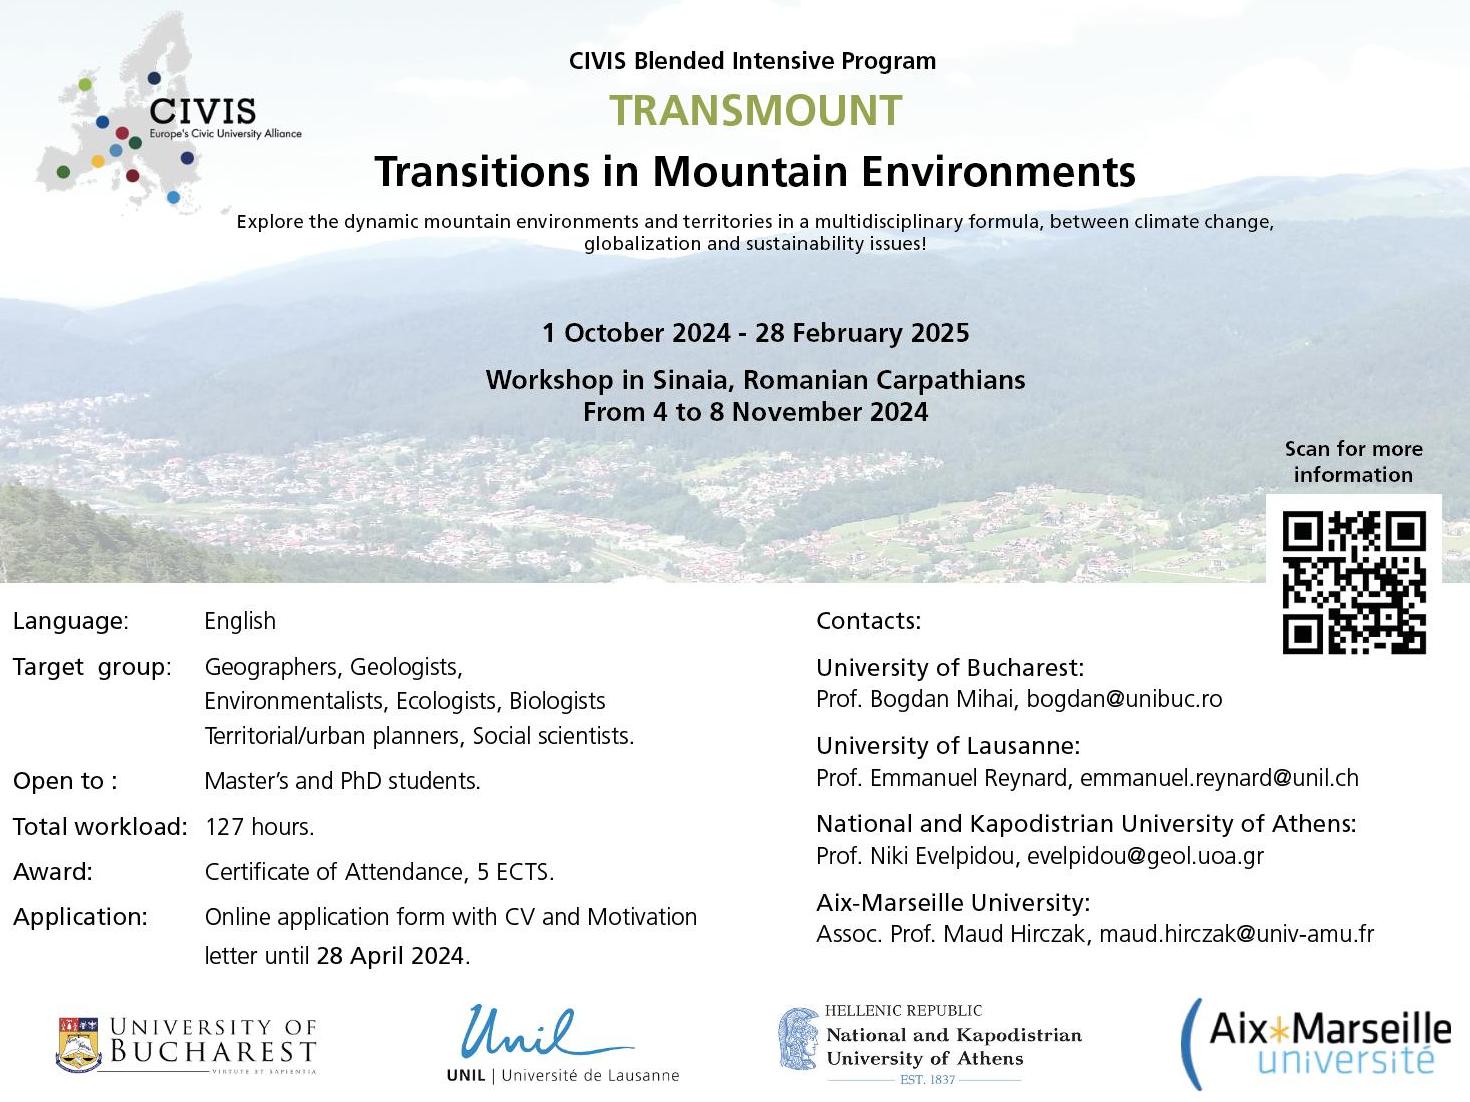 TRANSMOUNT - Transitions in Mountain Environments